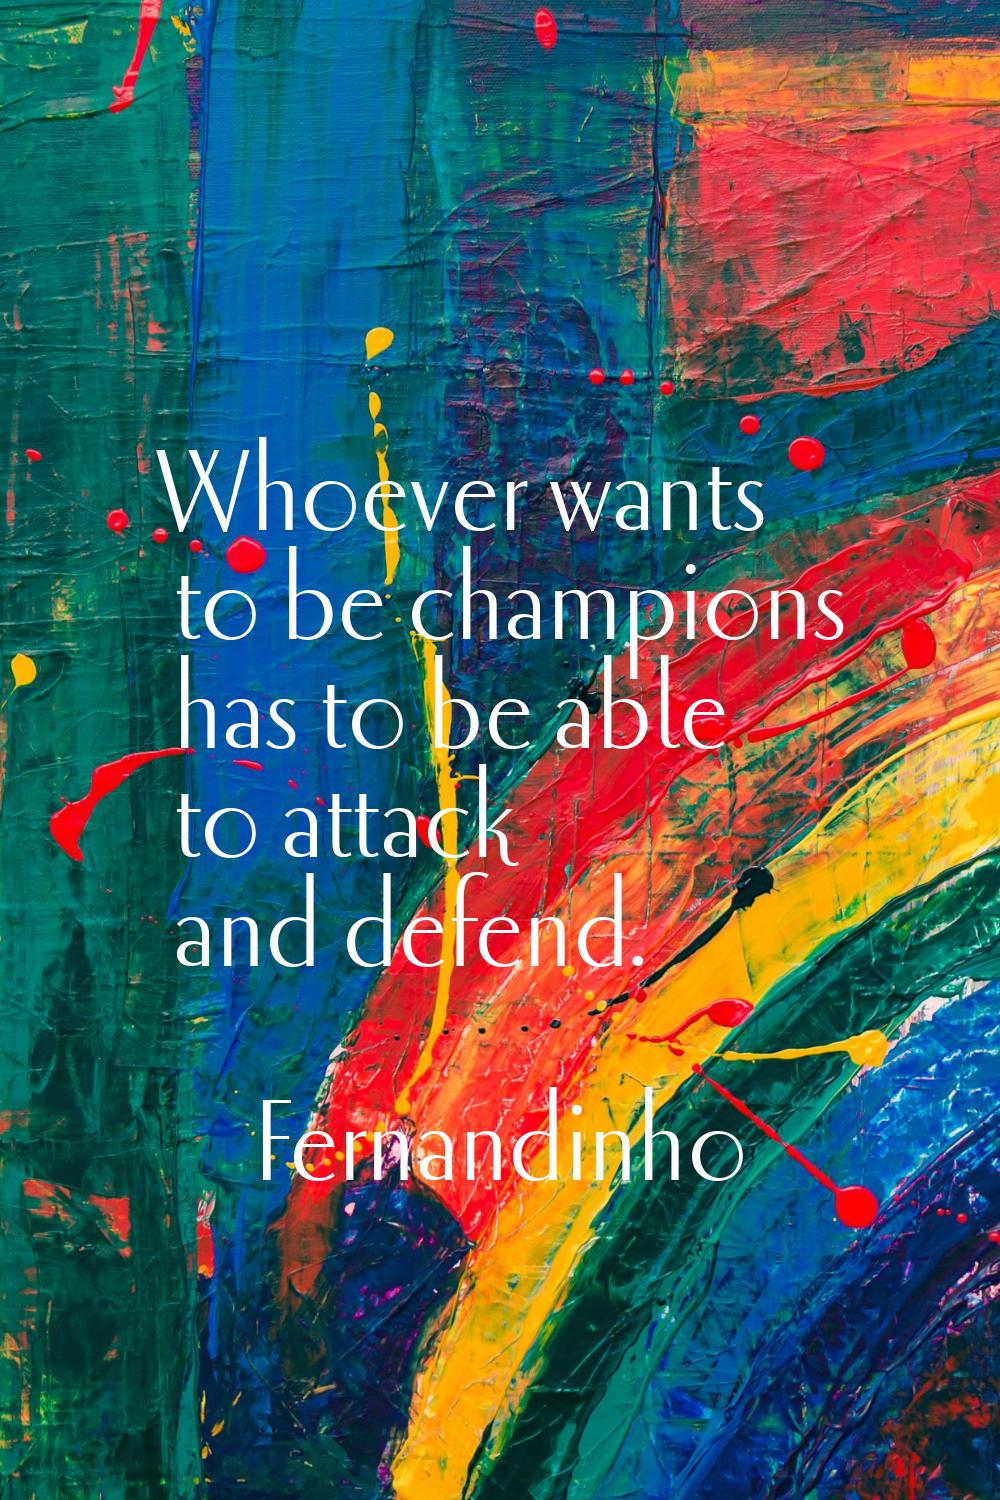 Whoever wants to be champions has to be able to attack and defend.